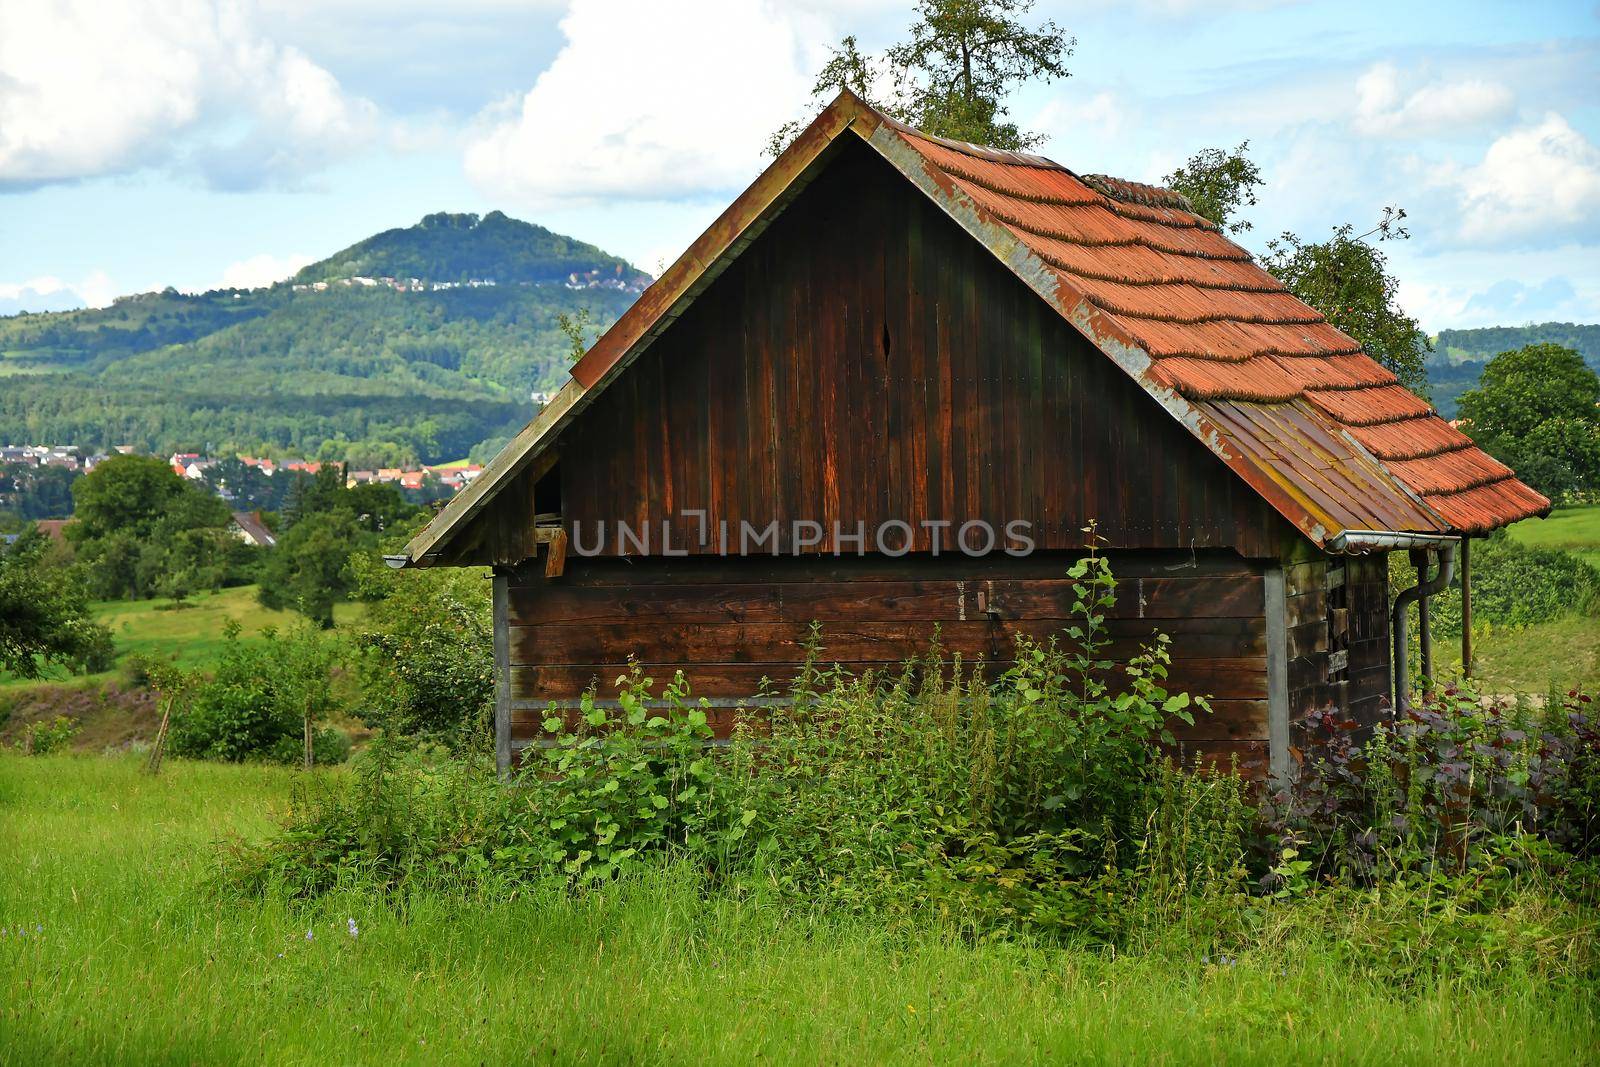 old barn with a hill in the background